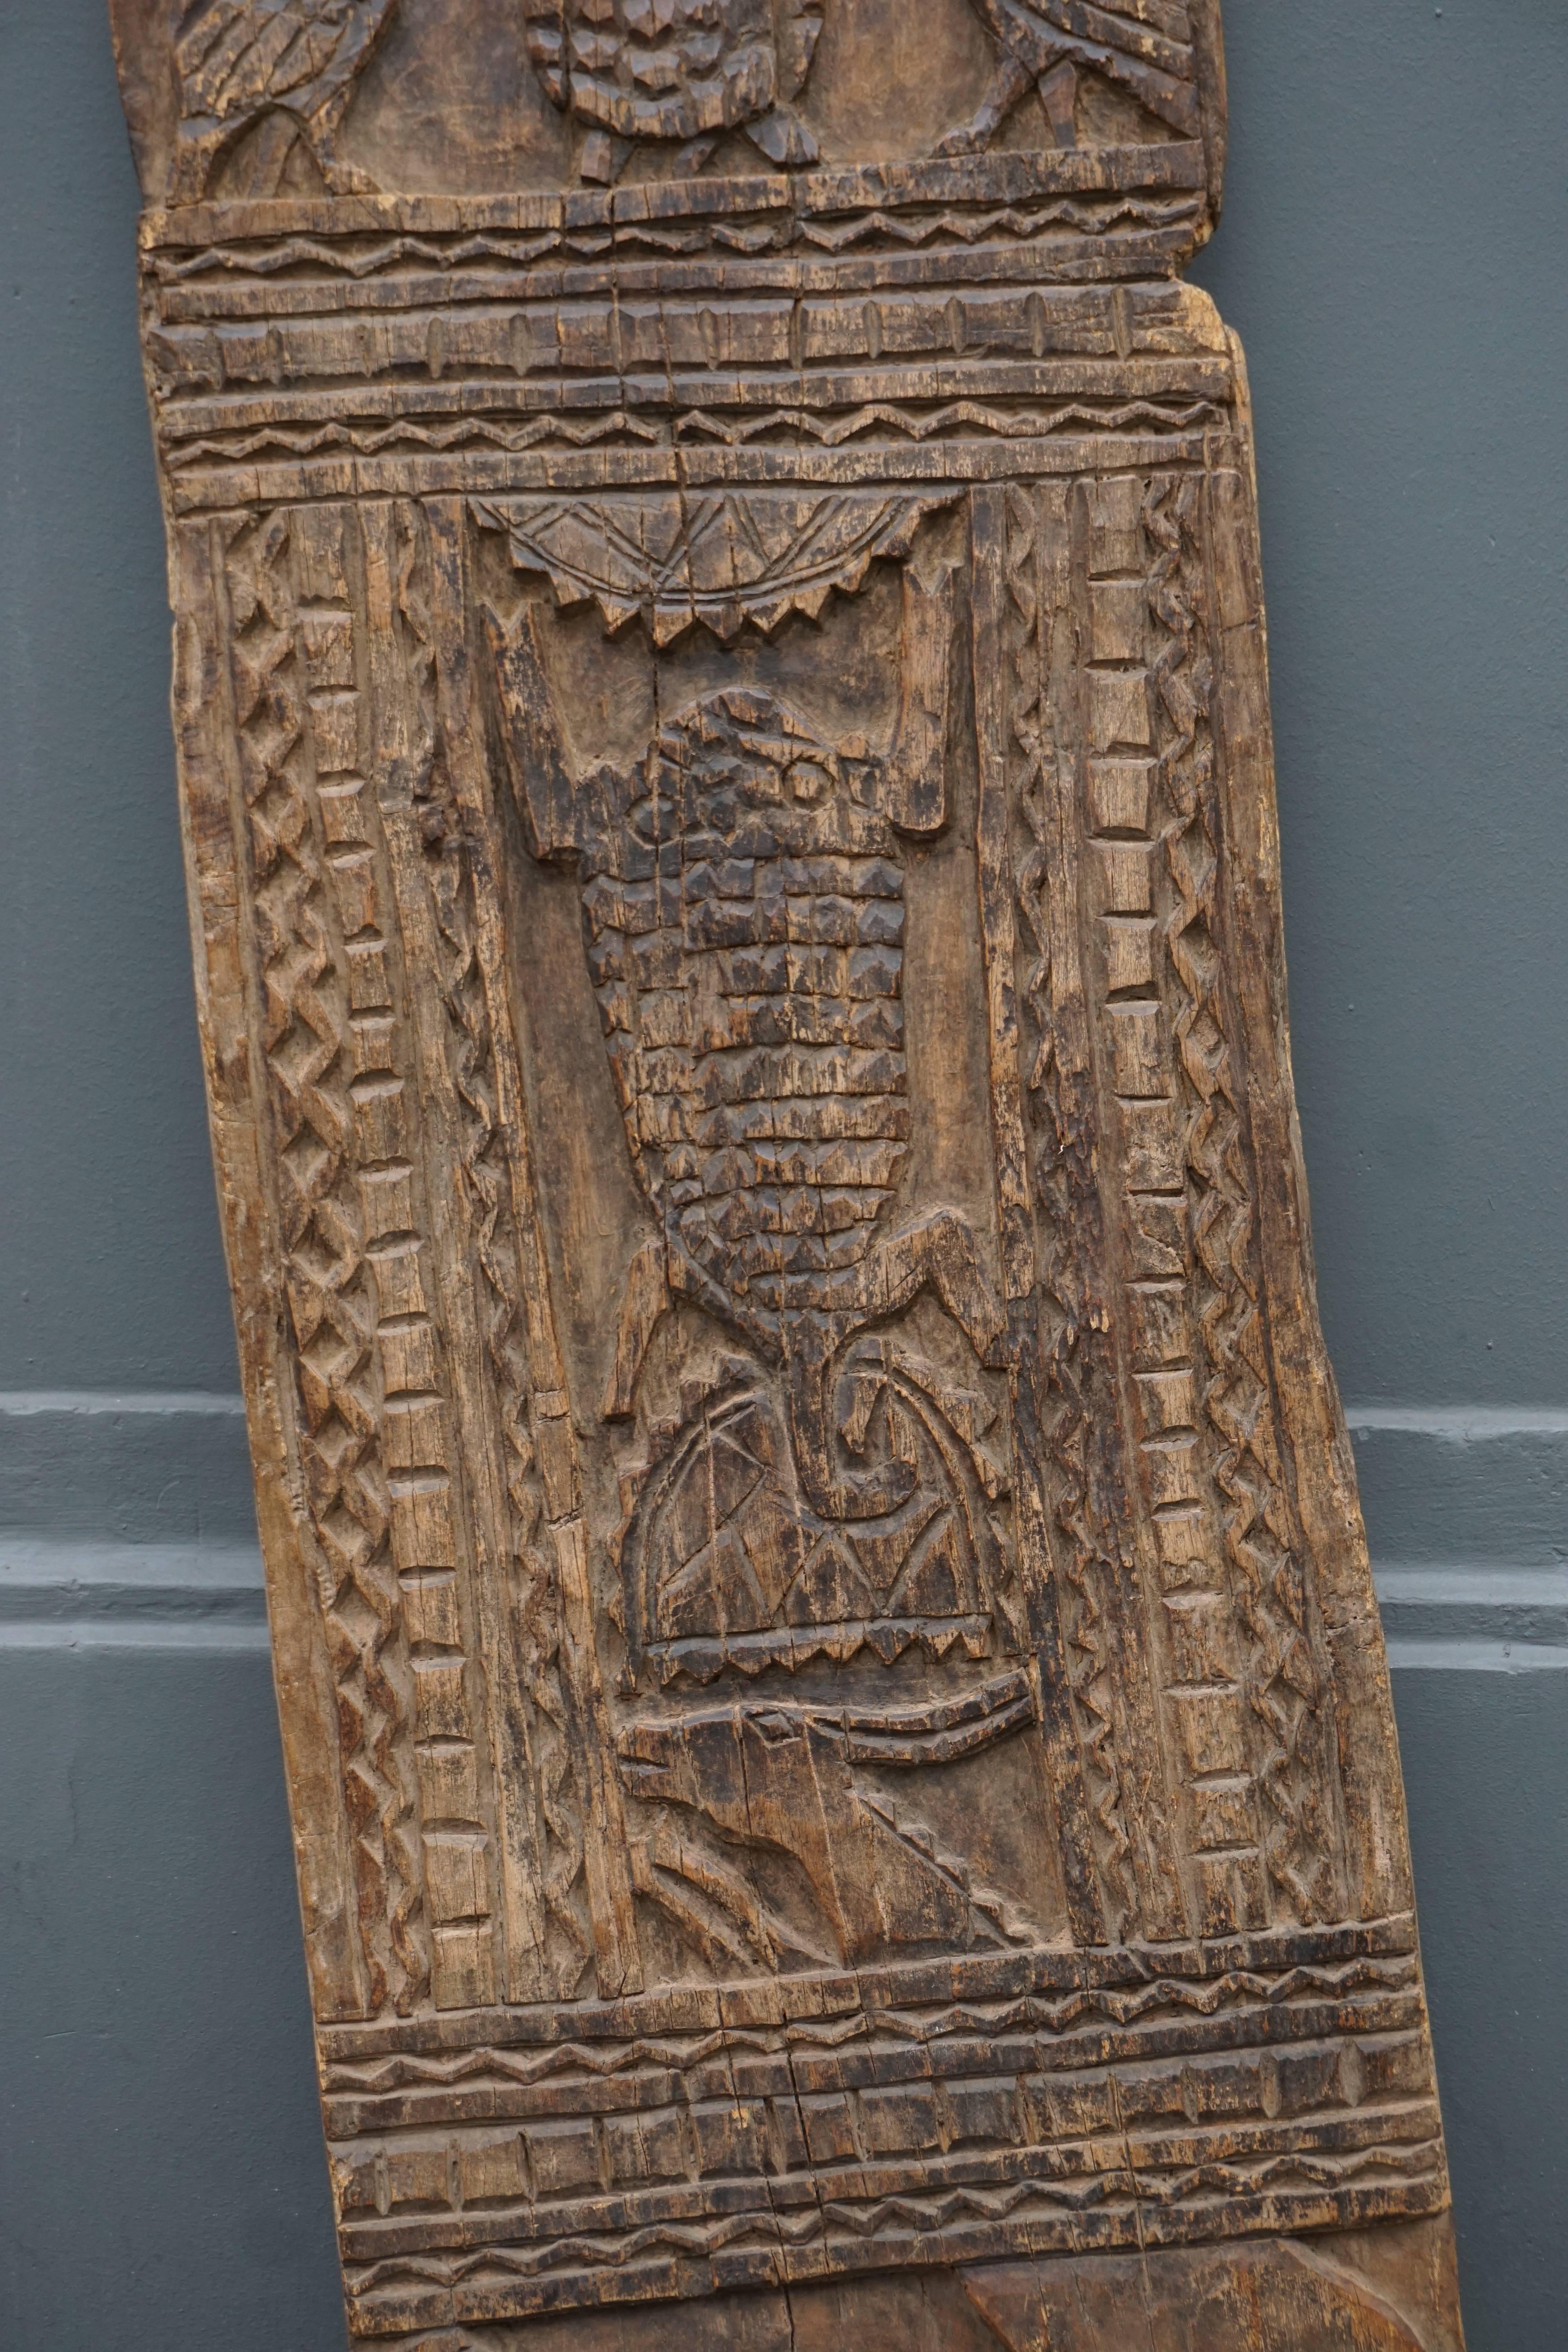 Old wooden hut door from Cameroon, decorated with carved ibis turtle, antilope and hunting scene within geometric ornament in the traditional ethnic style.
Superb old door African sculpture.